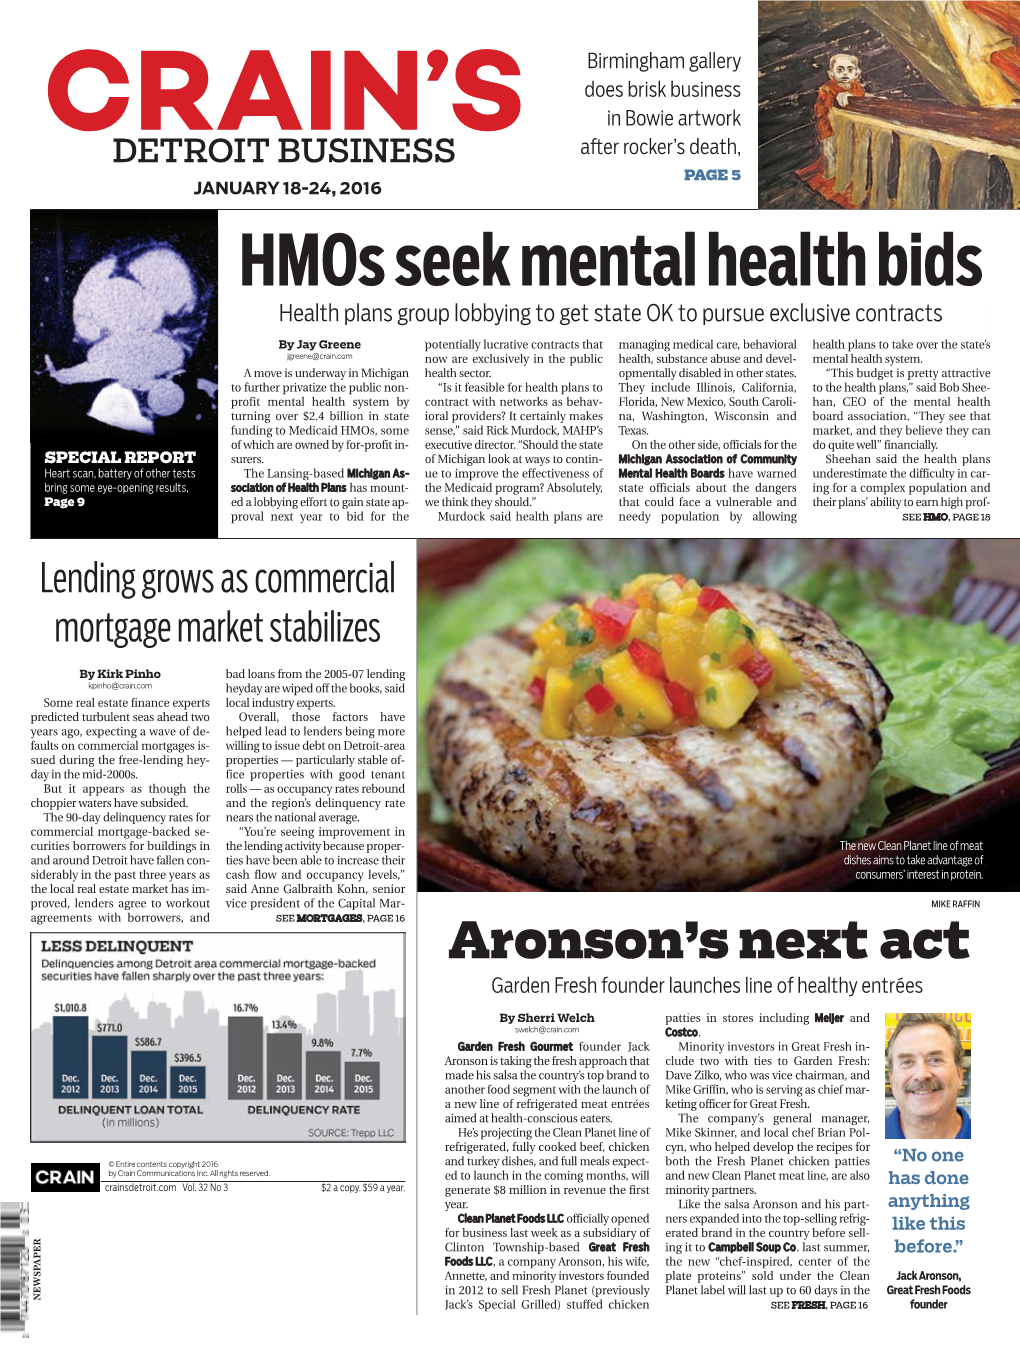 Hmos Seek Mental Health Bids Health Plans Group Lobbying to Get State OK to Pursue Exclusive Contracts